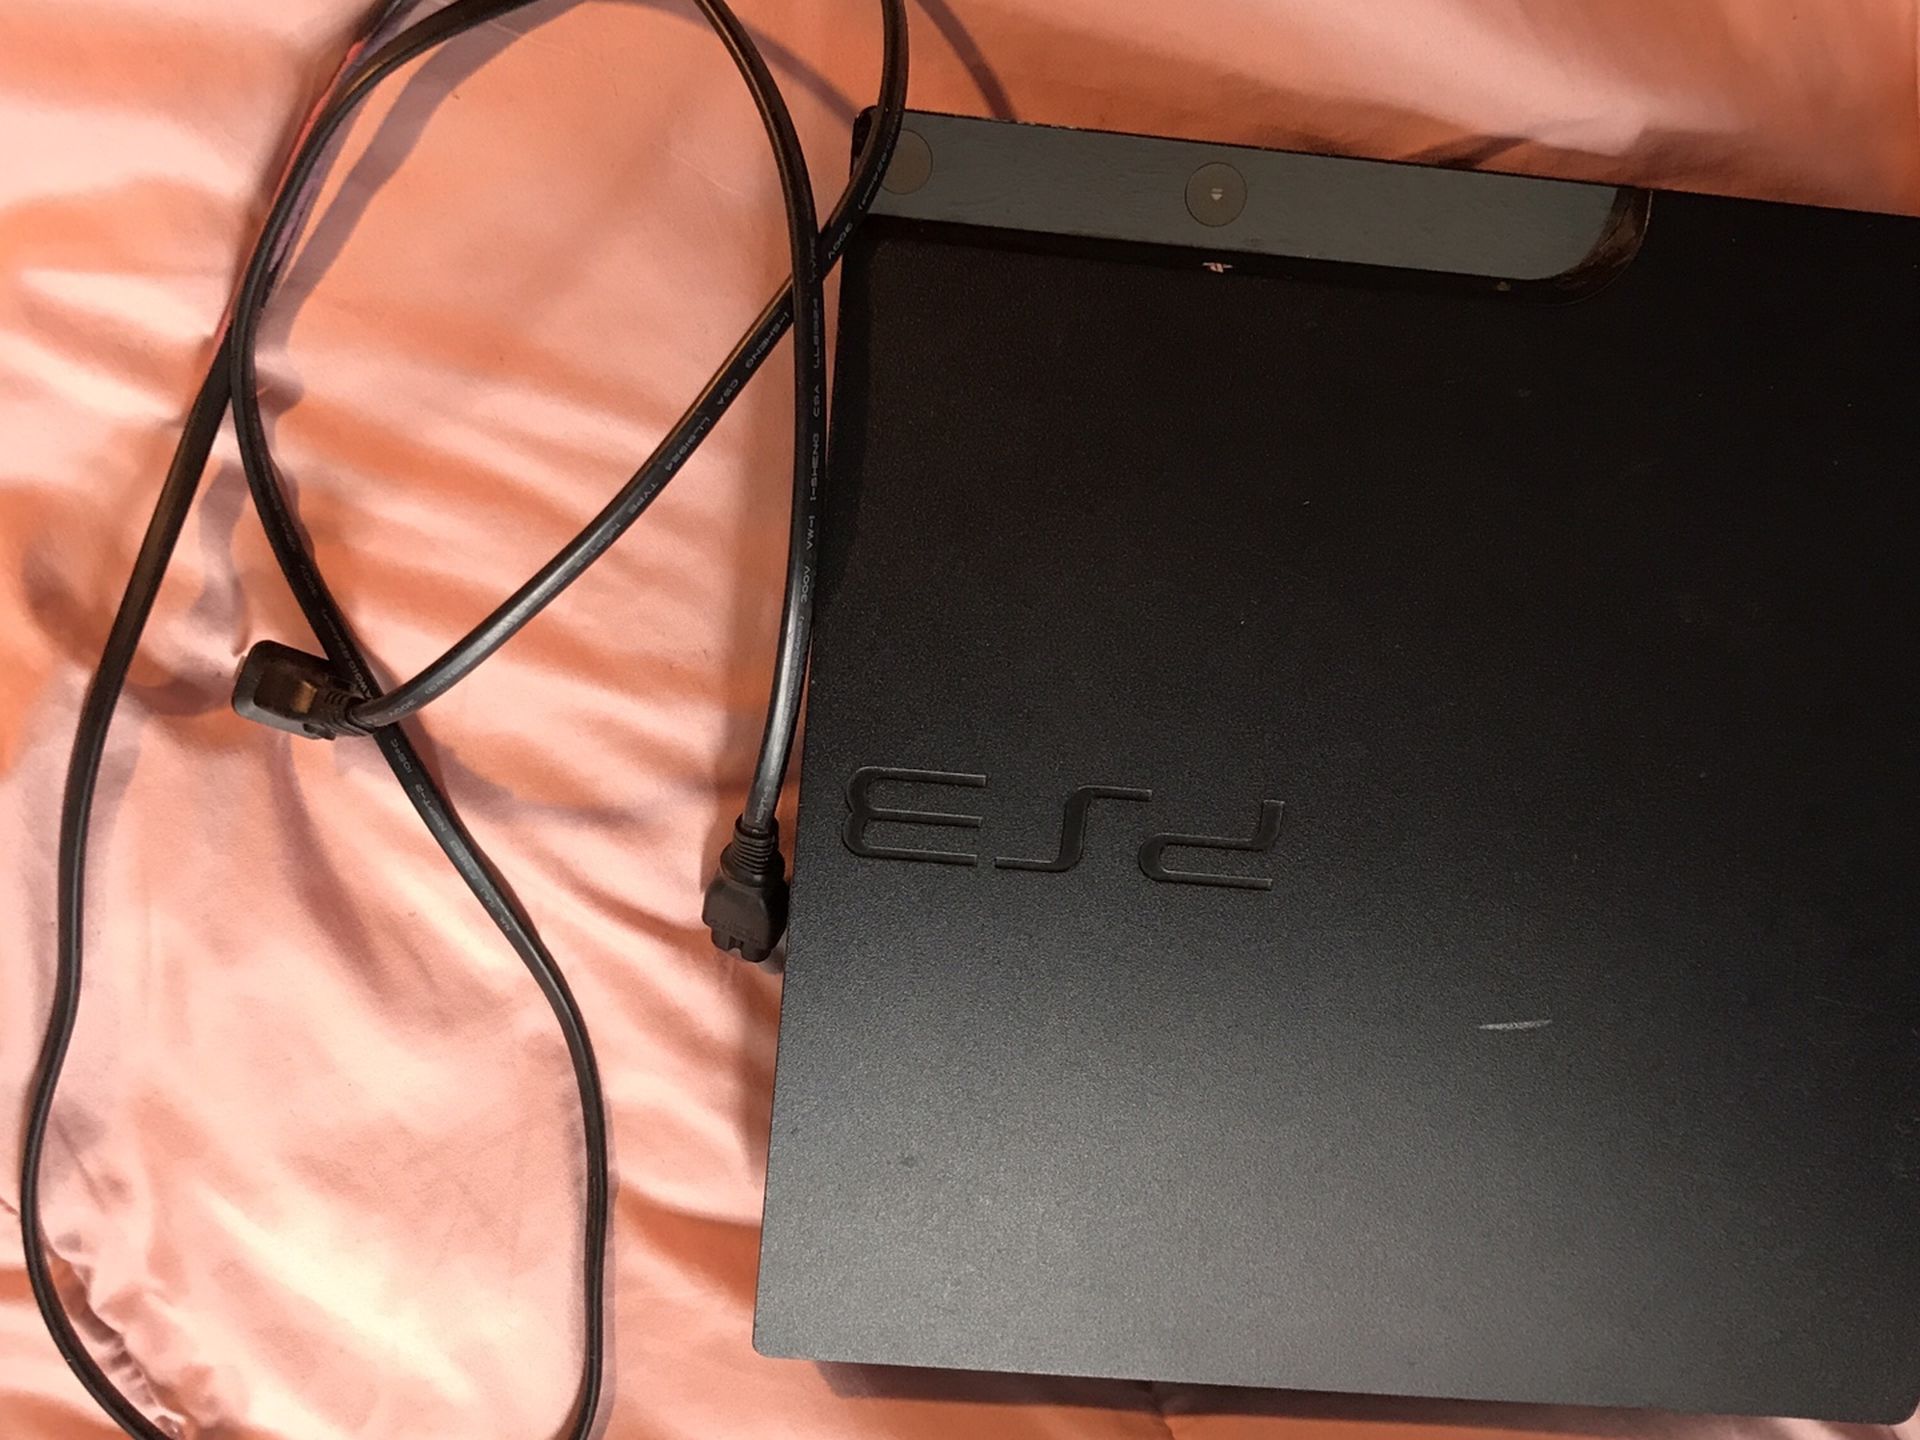 ps3 console with power cord and 2 sony controllers